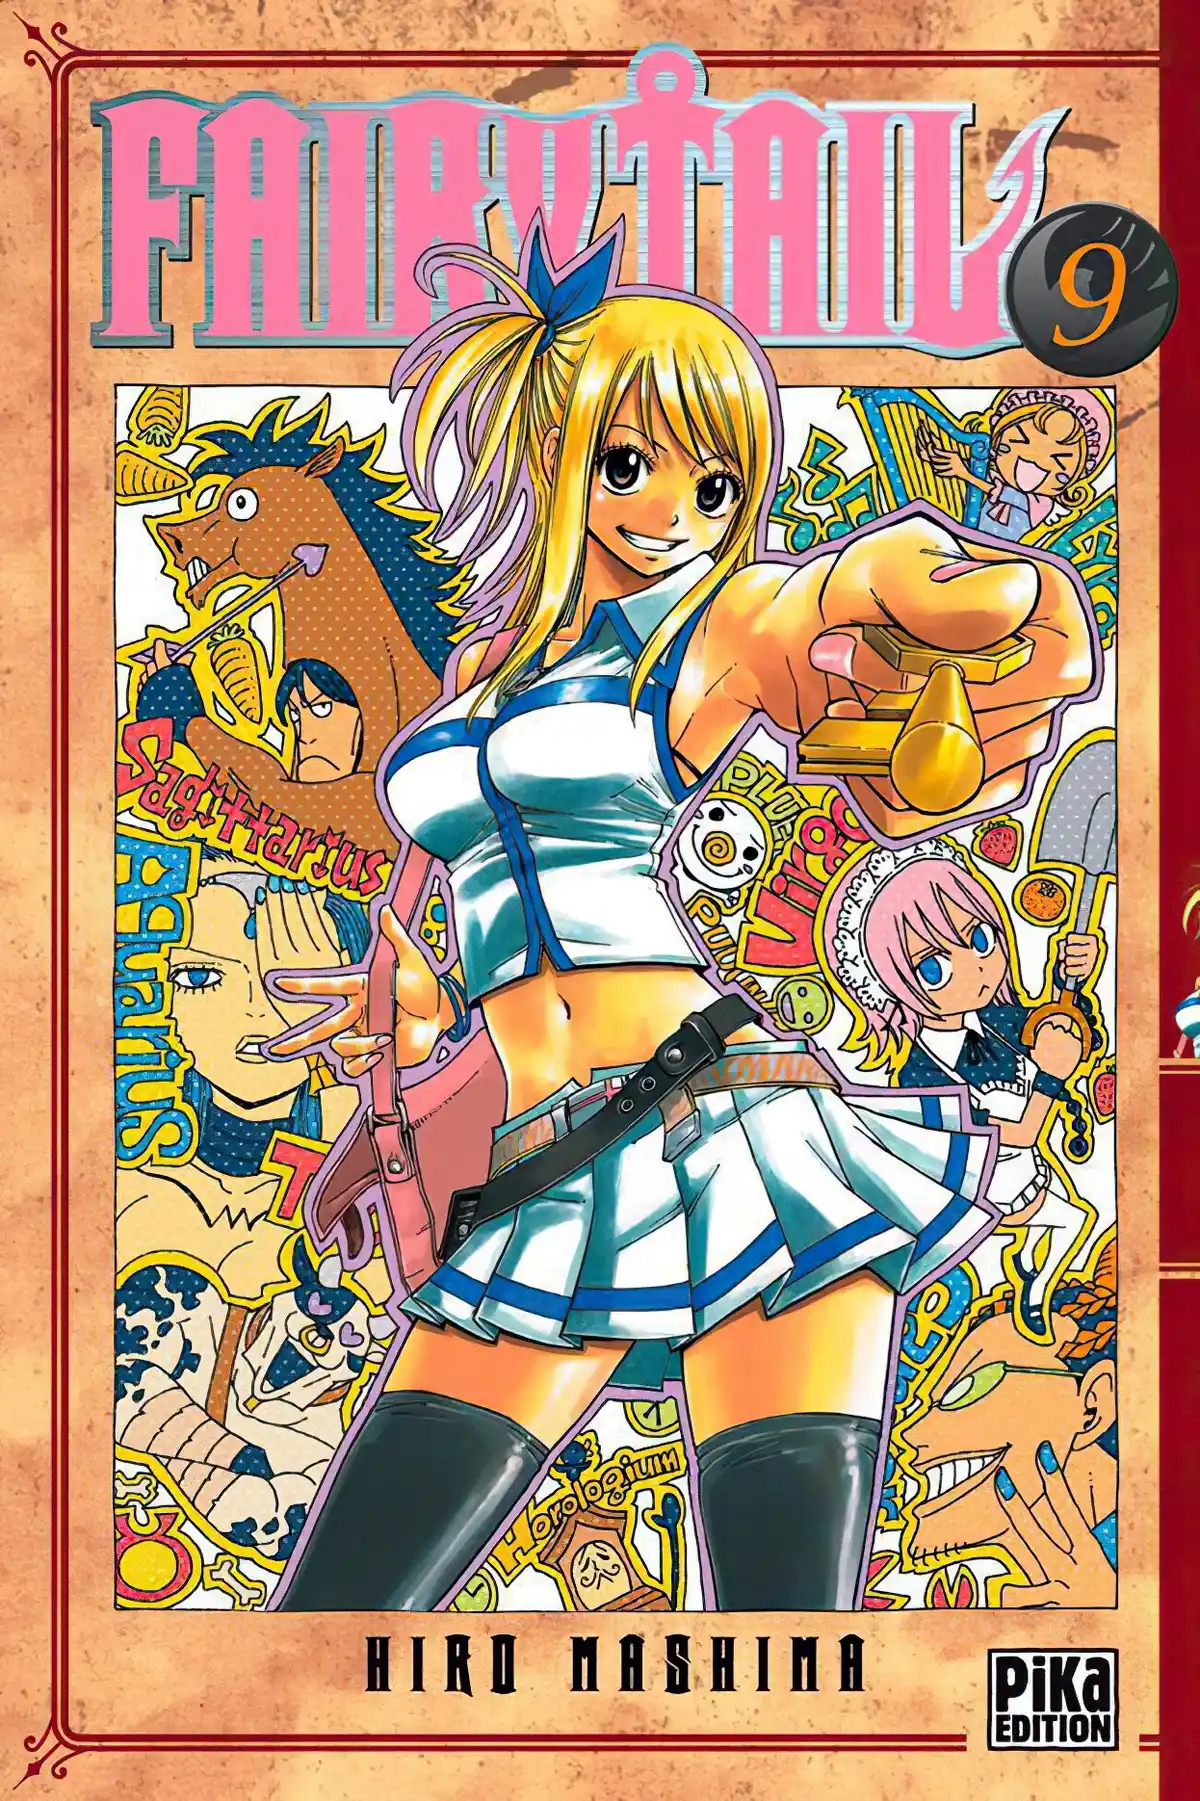 Fairy Tail Volume 9 page 1